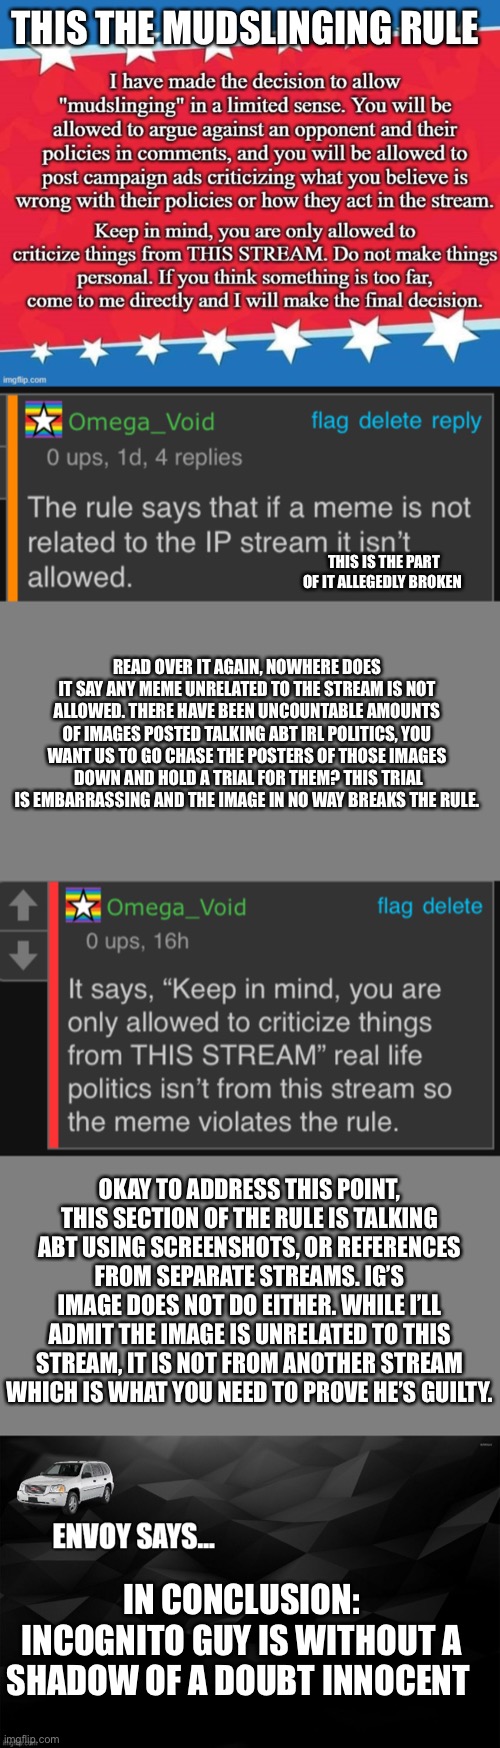 THIS THE MUDSLINGING RULE; THIS IS THE PART OF IT ALLEGEDLY BROKEN; READ OVER IT AGAIN, NOWHERE DOES IT SAY ANY MEME UNRELATED TO THE STREAM IS NOT ALLOWED. THERE HAVE BEEN UNCOUNTABLE AMOUNTS OF IMAGES POSTED TALKING ABT IRL POLITICS, YOU WANT US TO GO CHASE THE POSTERS OF THOSE IMAGES  DOWN AND HOLD A TRIAL FOR THEM? THIS TRIAL IS EMBARRASSING AND THE IMAGE IN NO WAY BREAKS THE RULE. OKAY TO ADDRESS THIS POINT, THIS SECTION OF THE RULE IS TALKING ABT USING SCREENSHOTS, OR REFERENCES FROM SEPARATE STREAMS. IG’S IMAGE DOES NOT DO EITHER. WHILE I’LL ADMIT THE IMAGE IS UNRELATED TO THIS STREAM, IT IS NOT FROM ANOTHER STREAM WHICH IS WHAT YOU NEED TO PROVE HE’S GUILTY. IN CONCLUSION: INCOGNITO GUY IS WITHOUT A SHADOW OF A DOUBT INNOCENT | image tagged in blank grey,envoy says | made w/ Imgflip meme maker